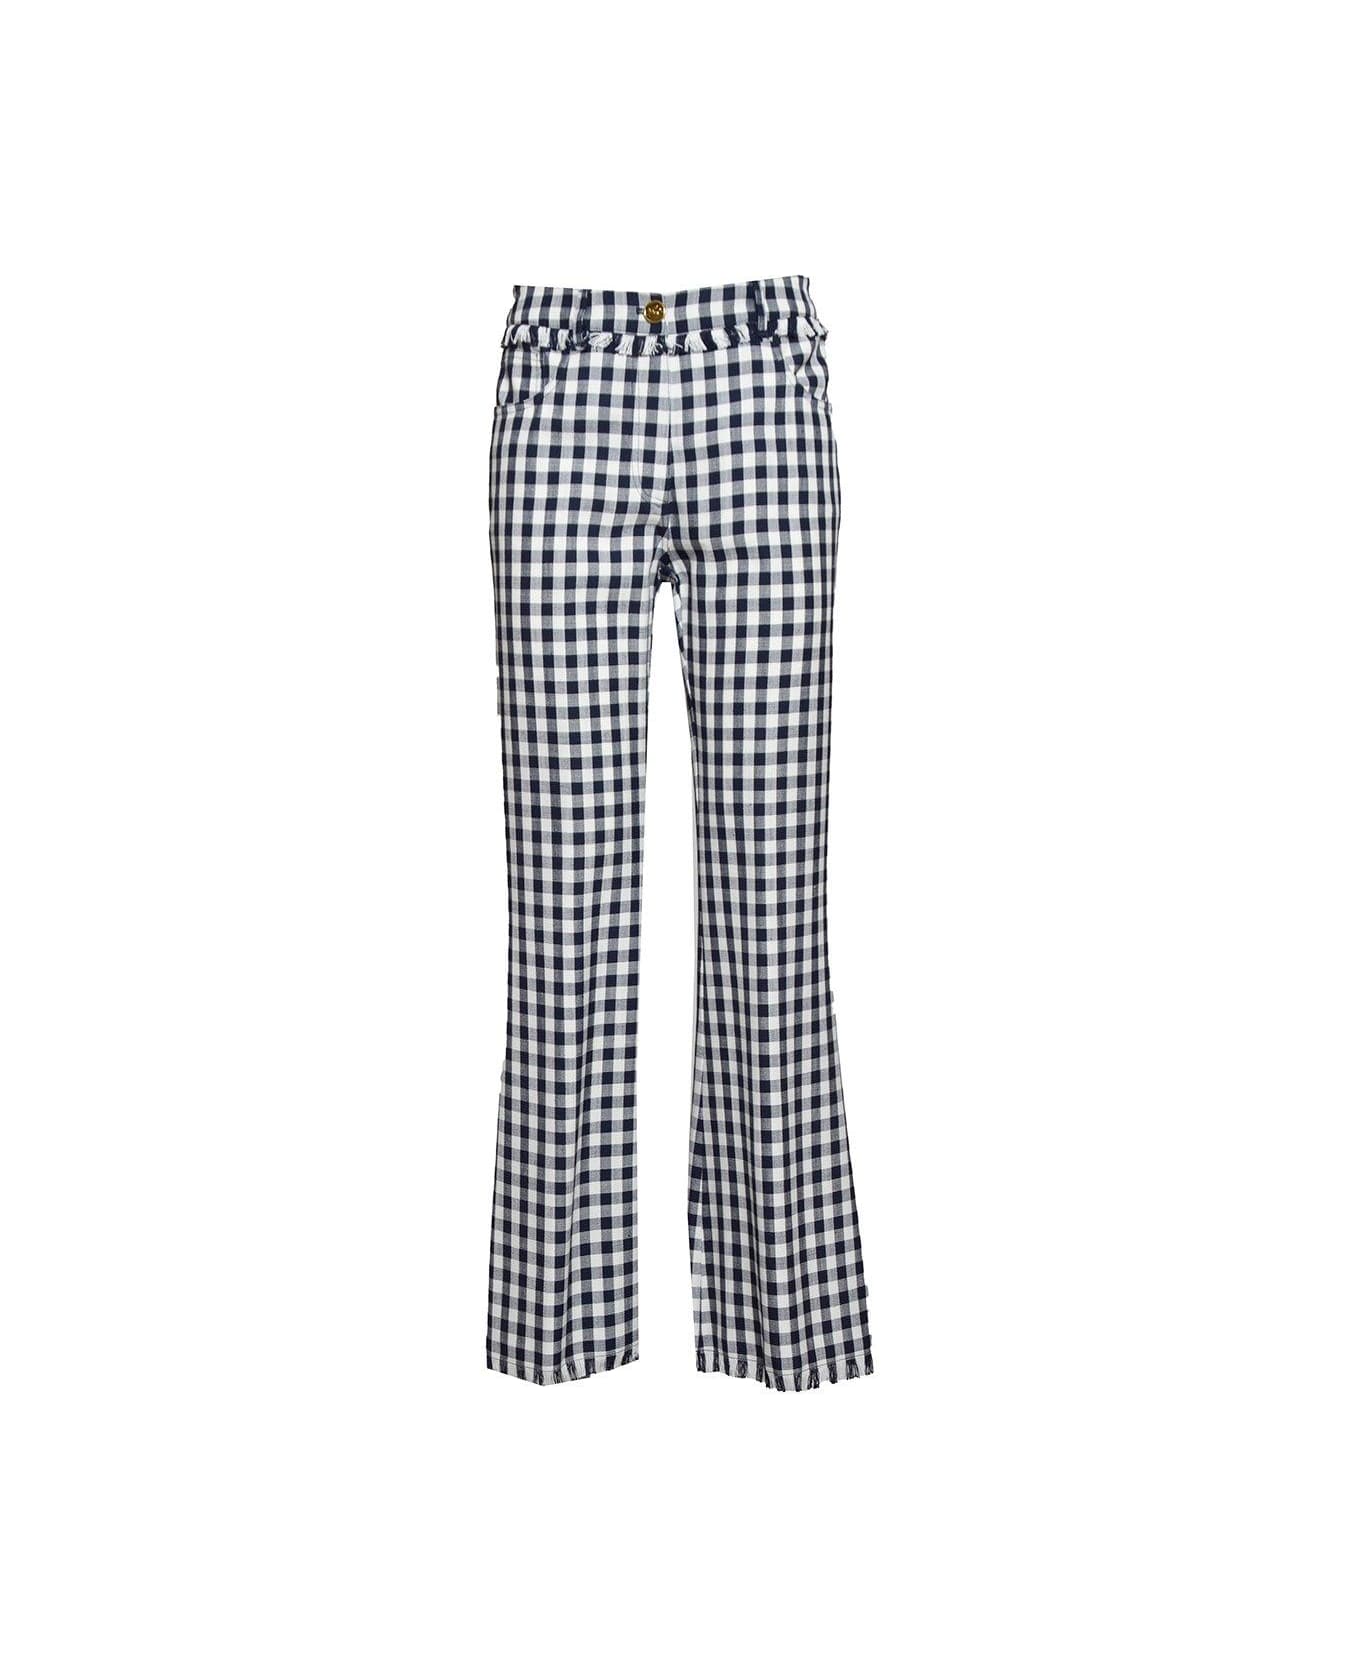 Etro Mid Rise Gingham Checked Trousers - Bianco/nero ボトムス